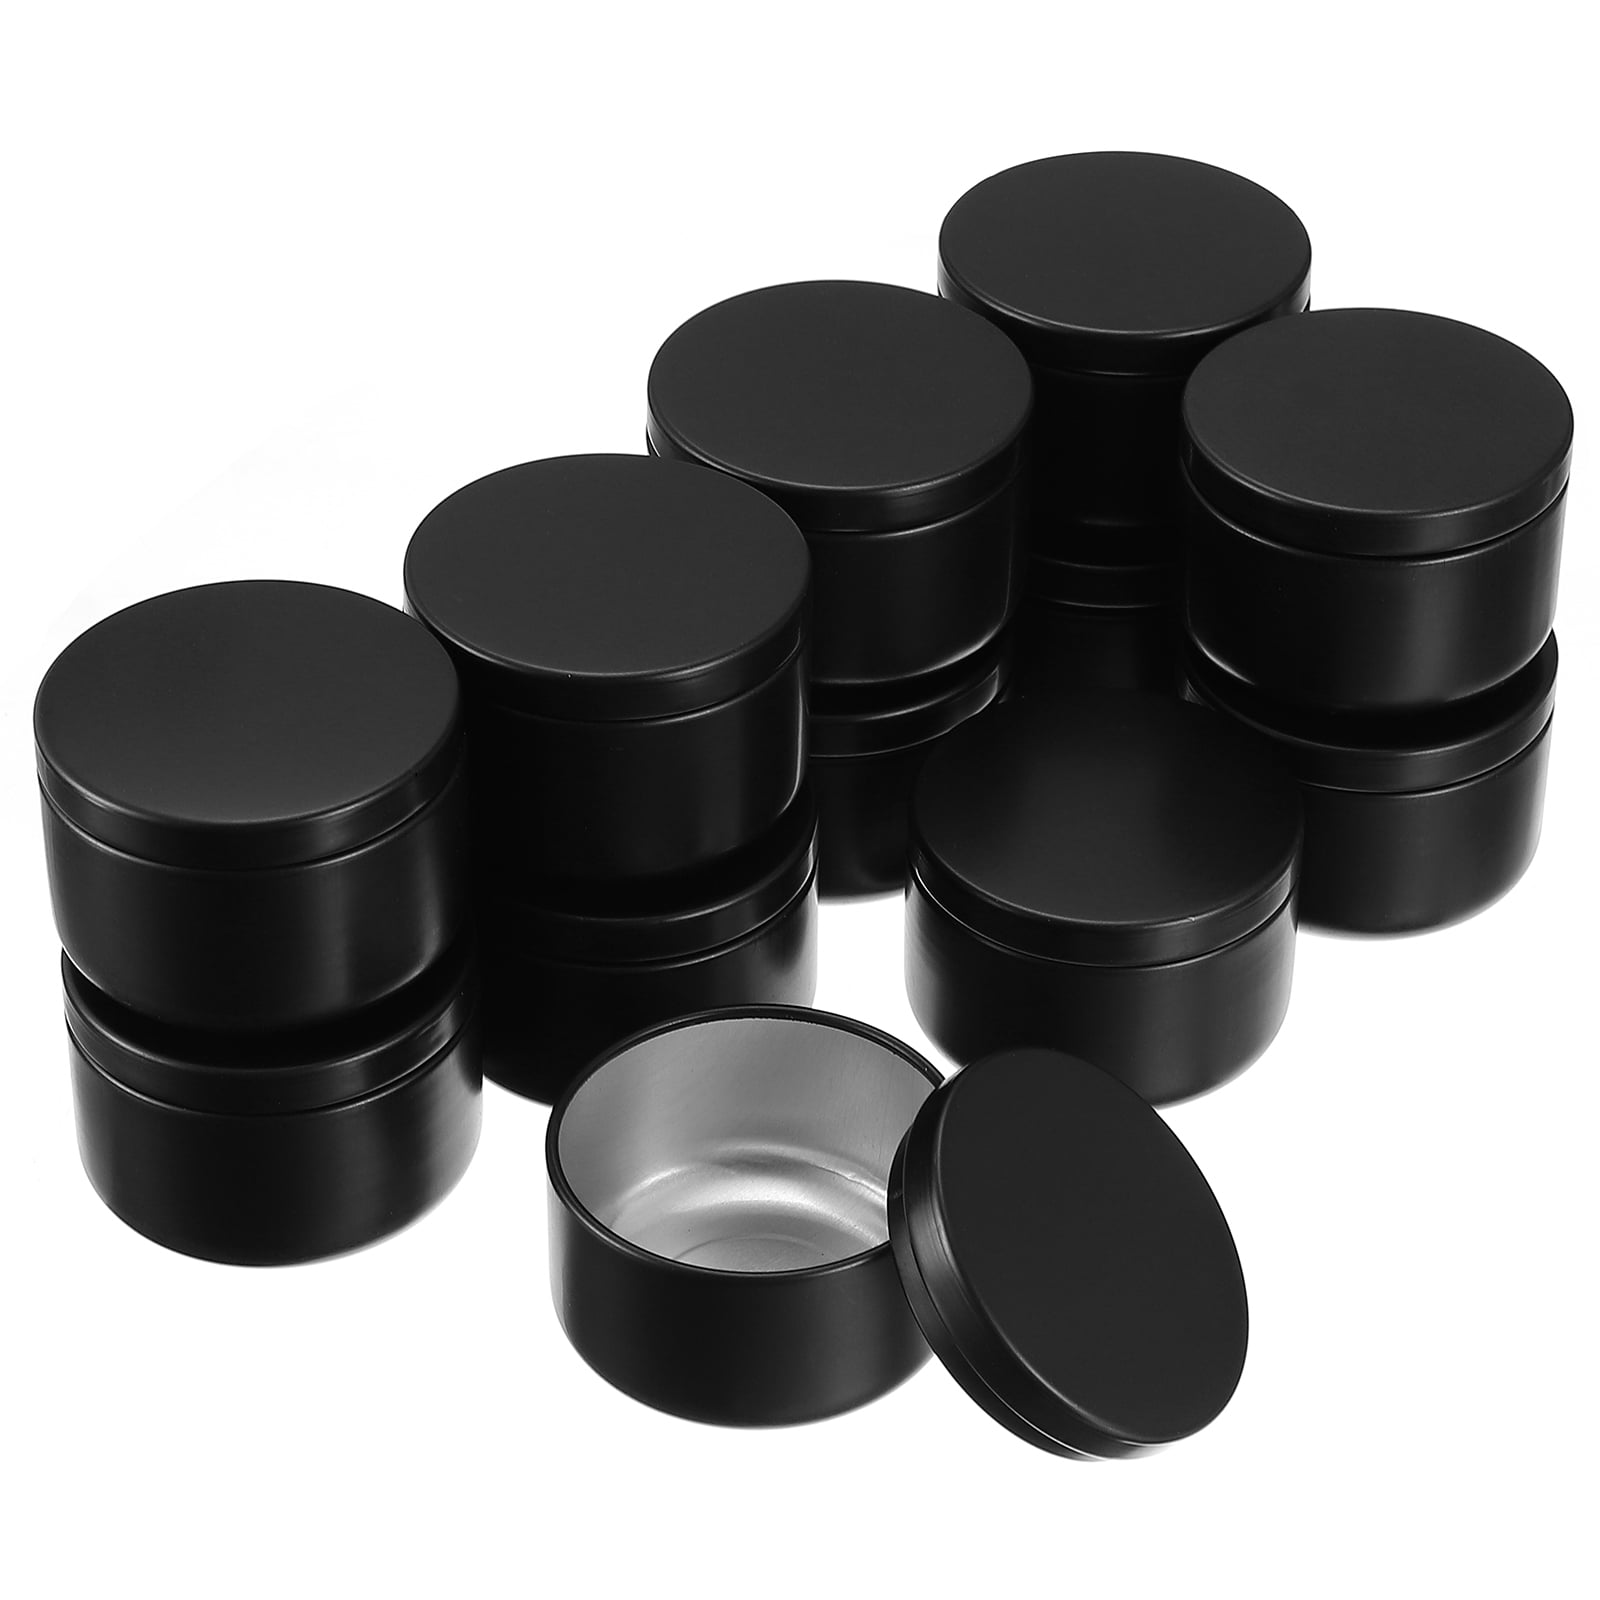 12 PCS 8 OZ Candle Jars for Making Candles, Round Metal Candle Tins with  Lids Bulk, Reusable Candle Containers for DIY Candle Making, Arts Crafts